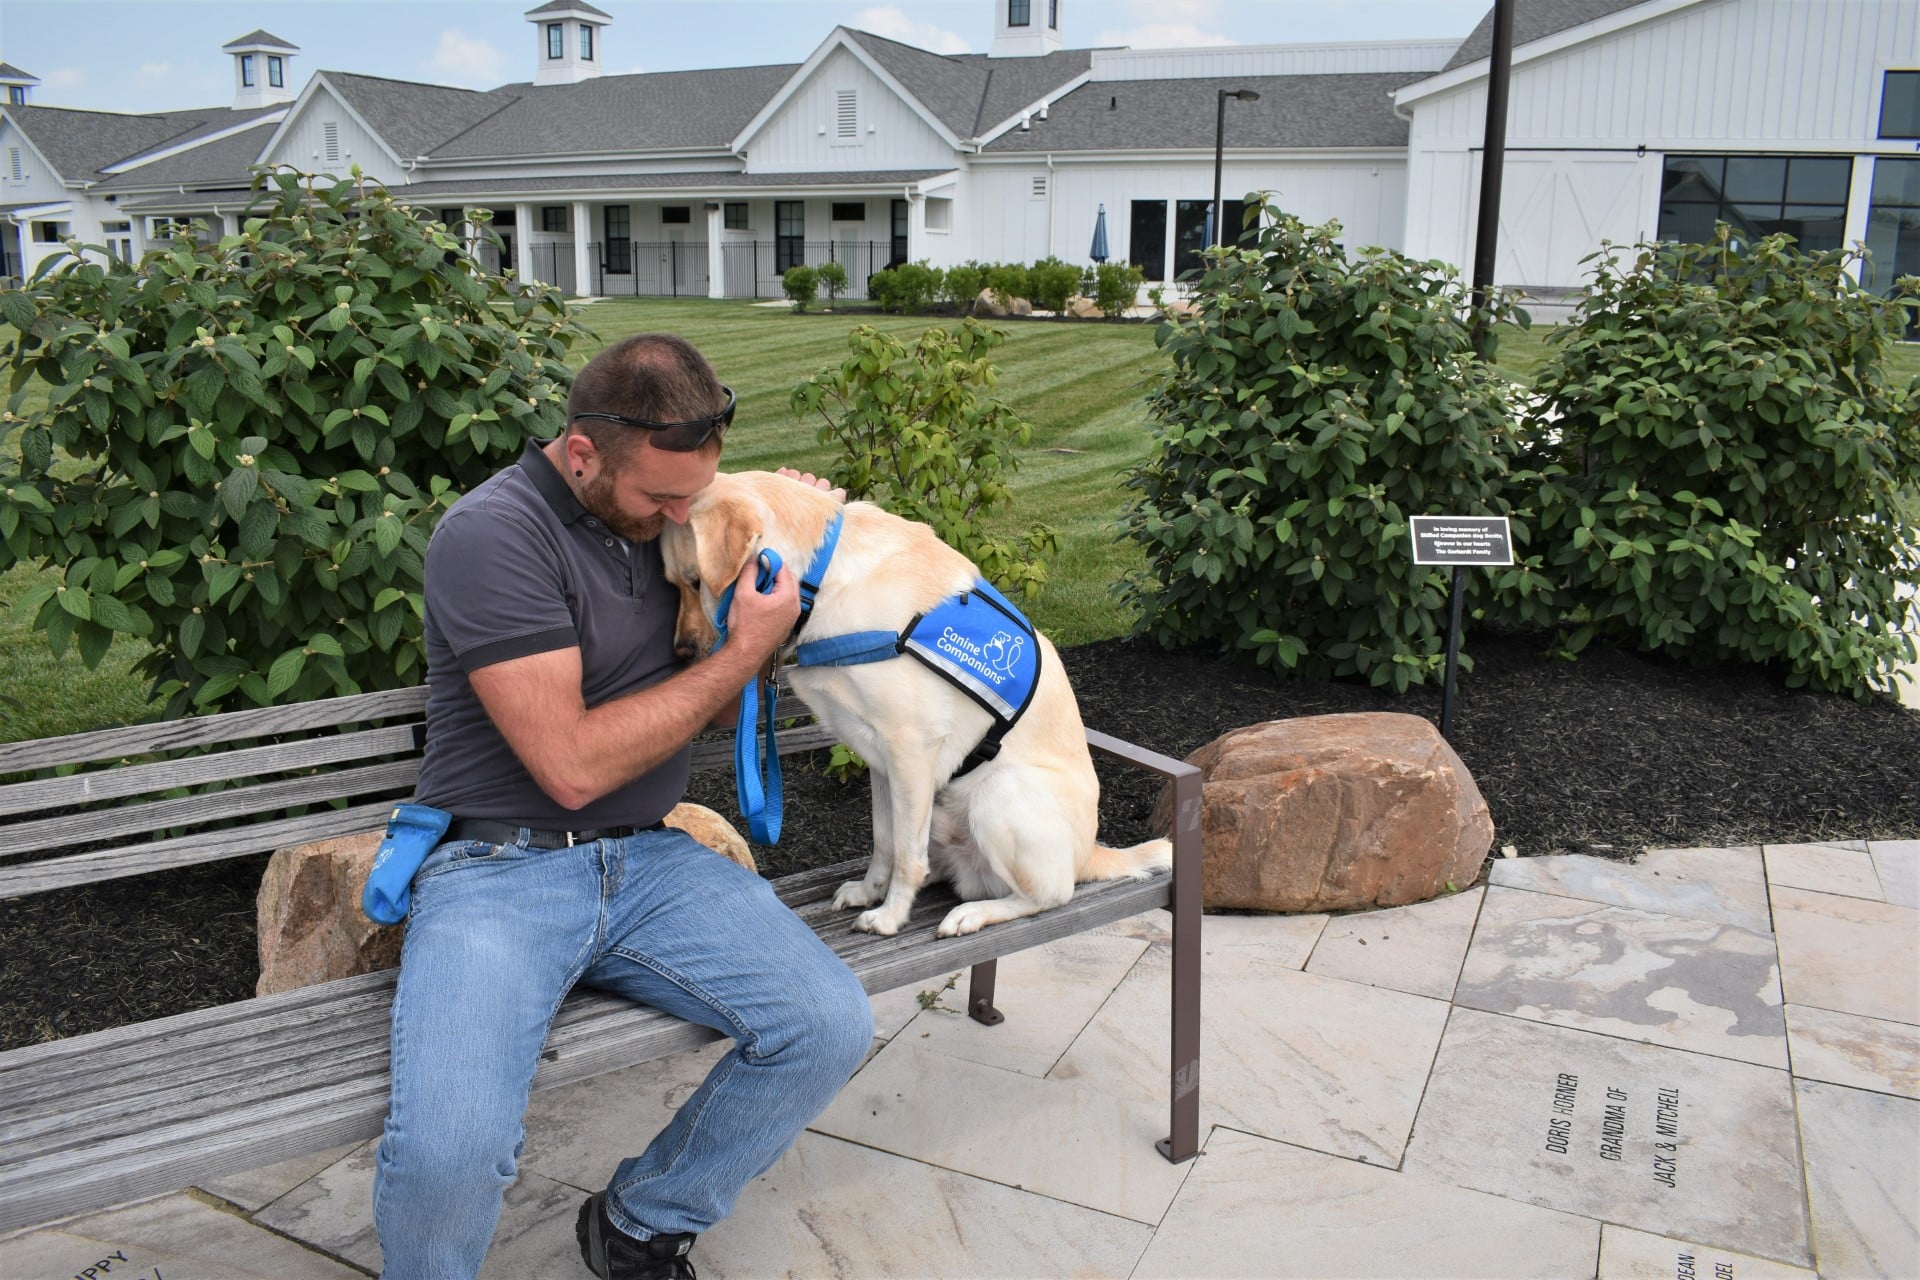 A man shares a tender moment with a yellow Labrador service dog on a bench, in front of a building with lush greenery around.